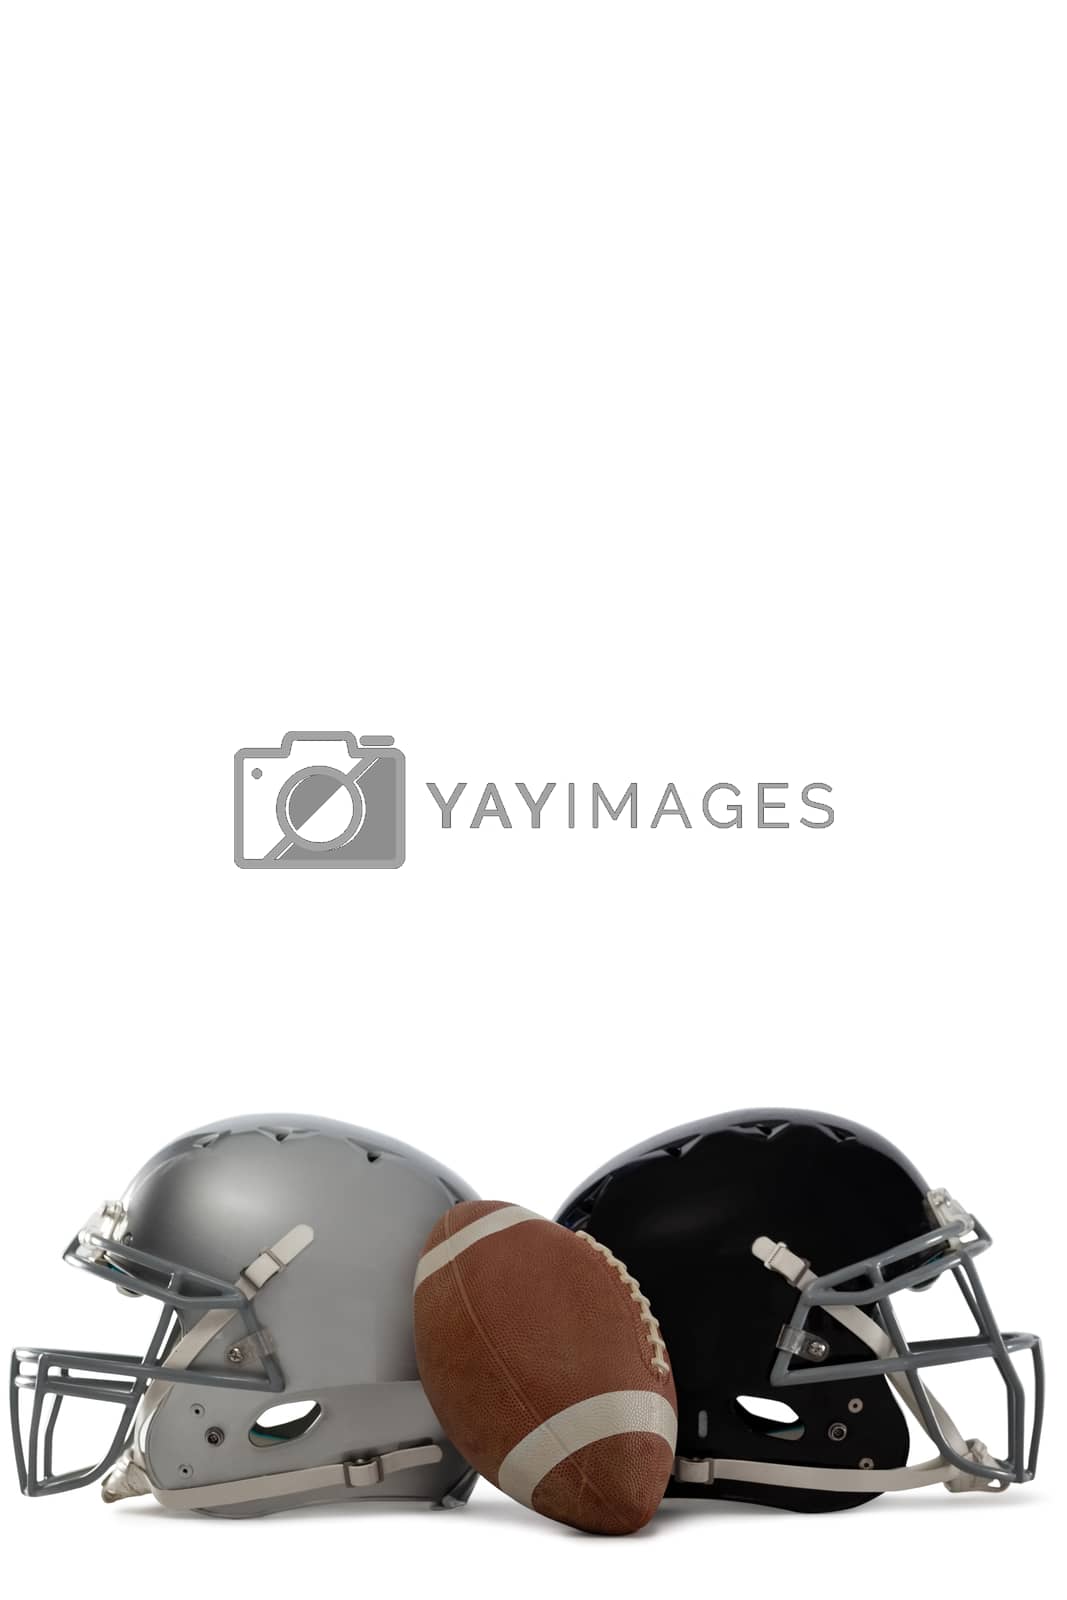 Royalty free image of  American football with helmets by Wavebreakmedia